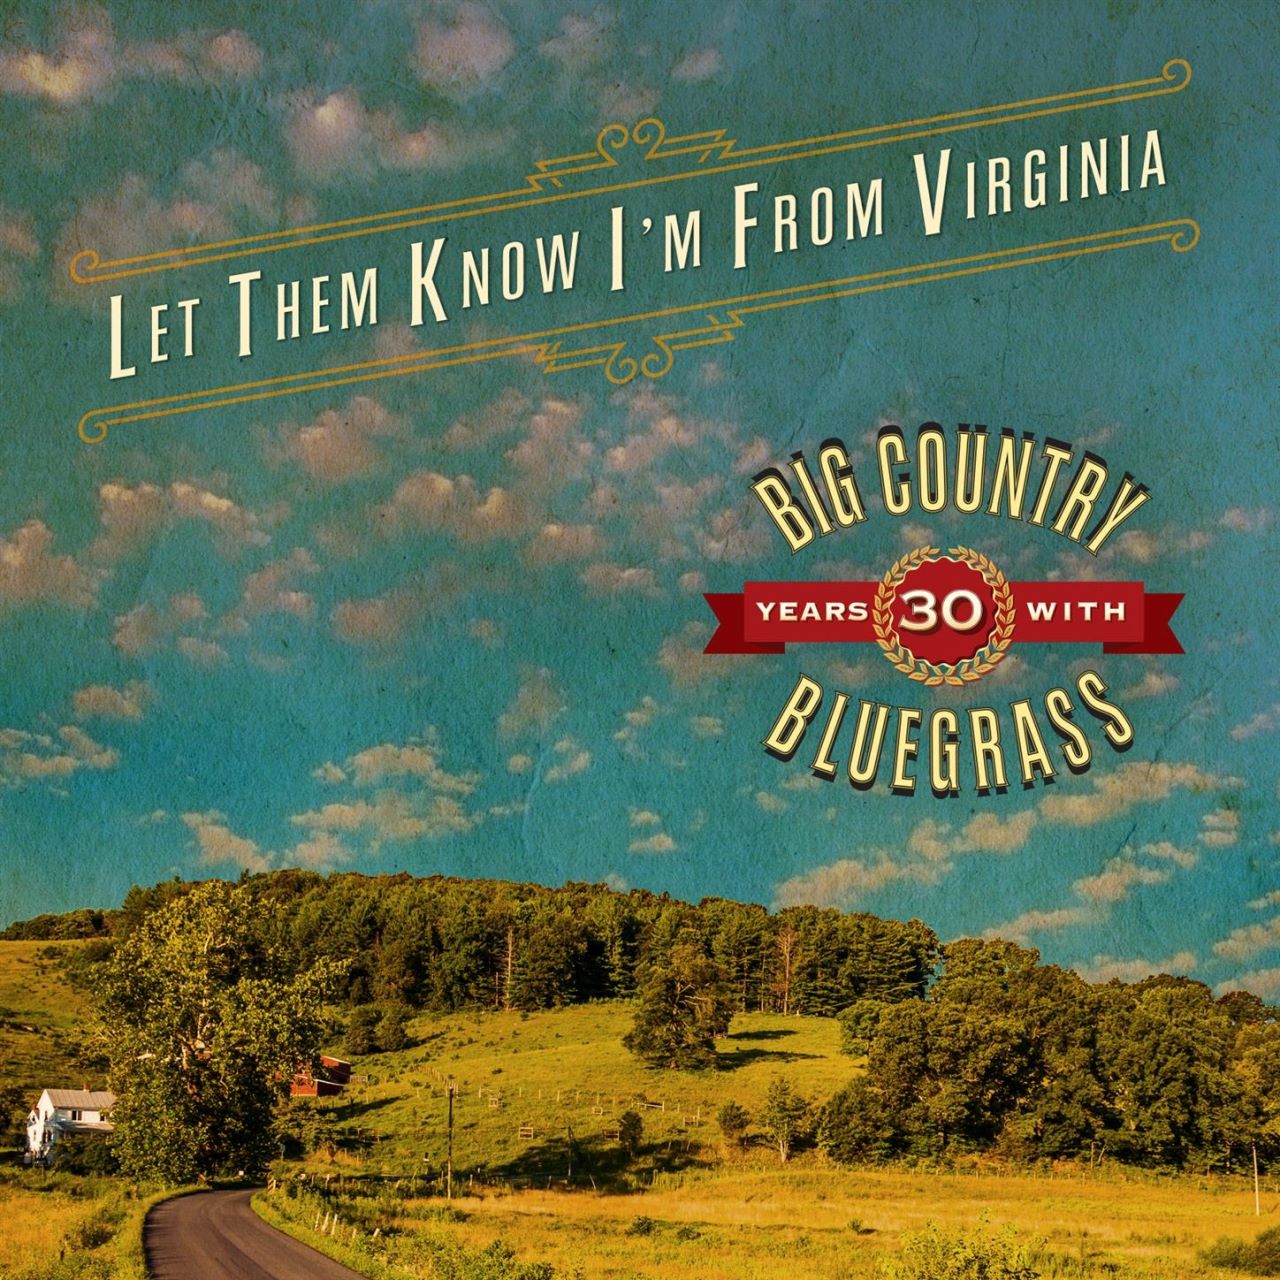 Big Country Bluegrass - Let Them Know I’m From Virginia cover album